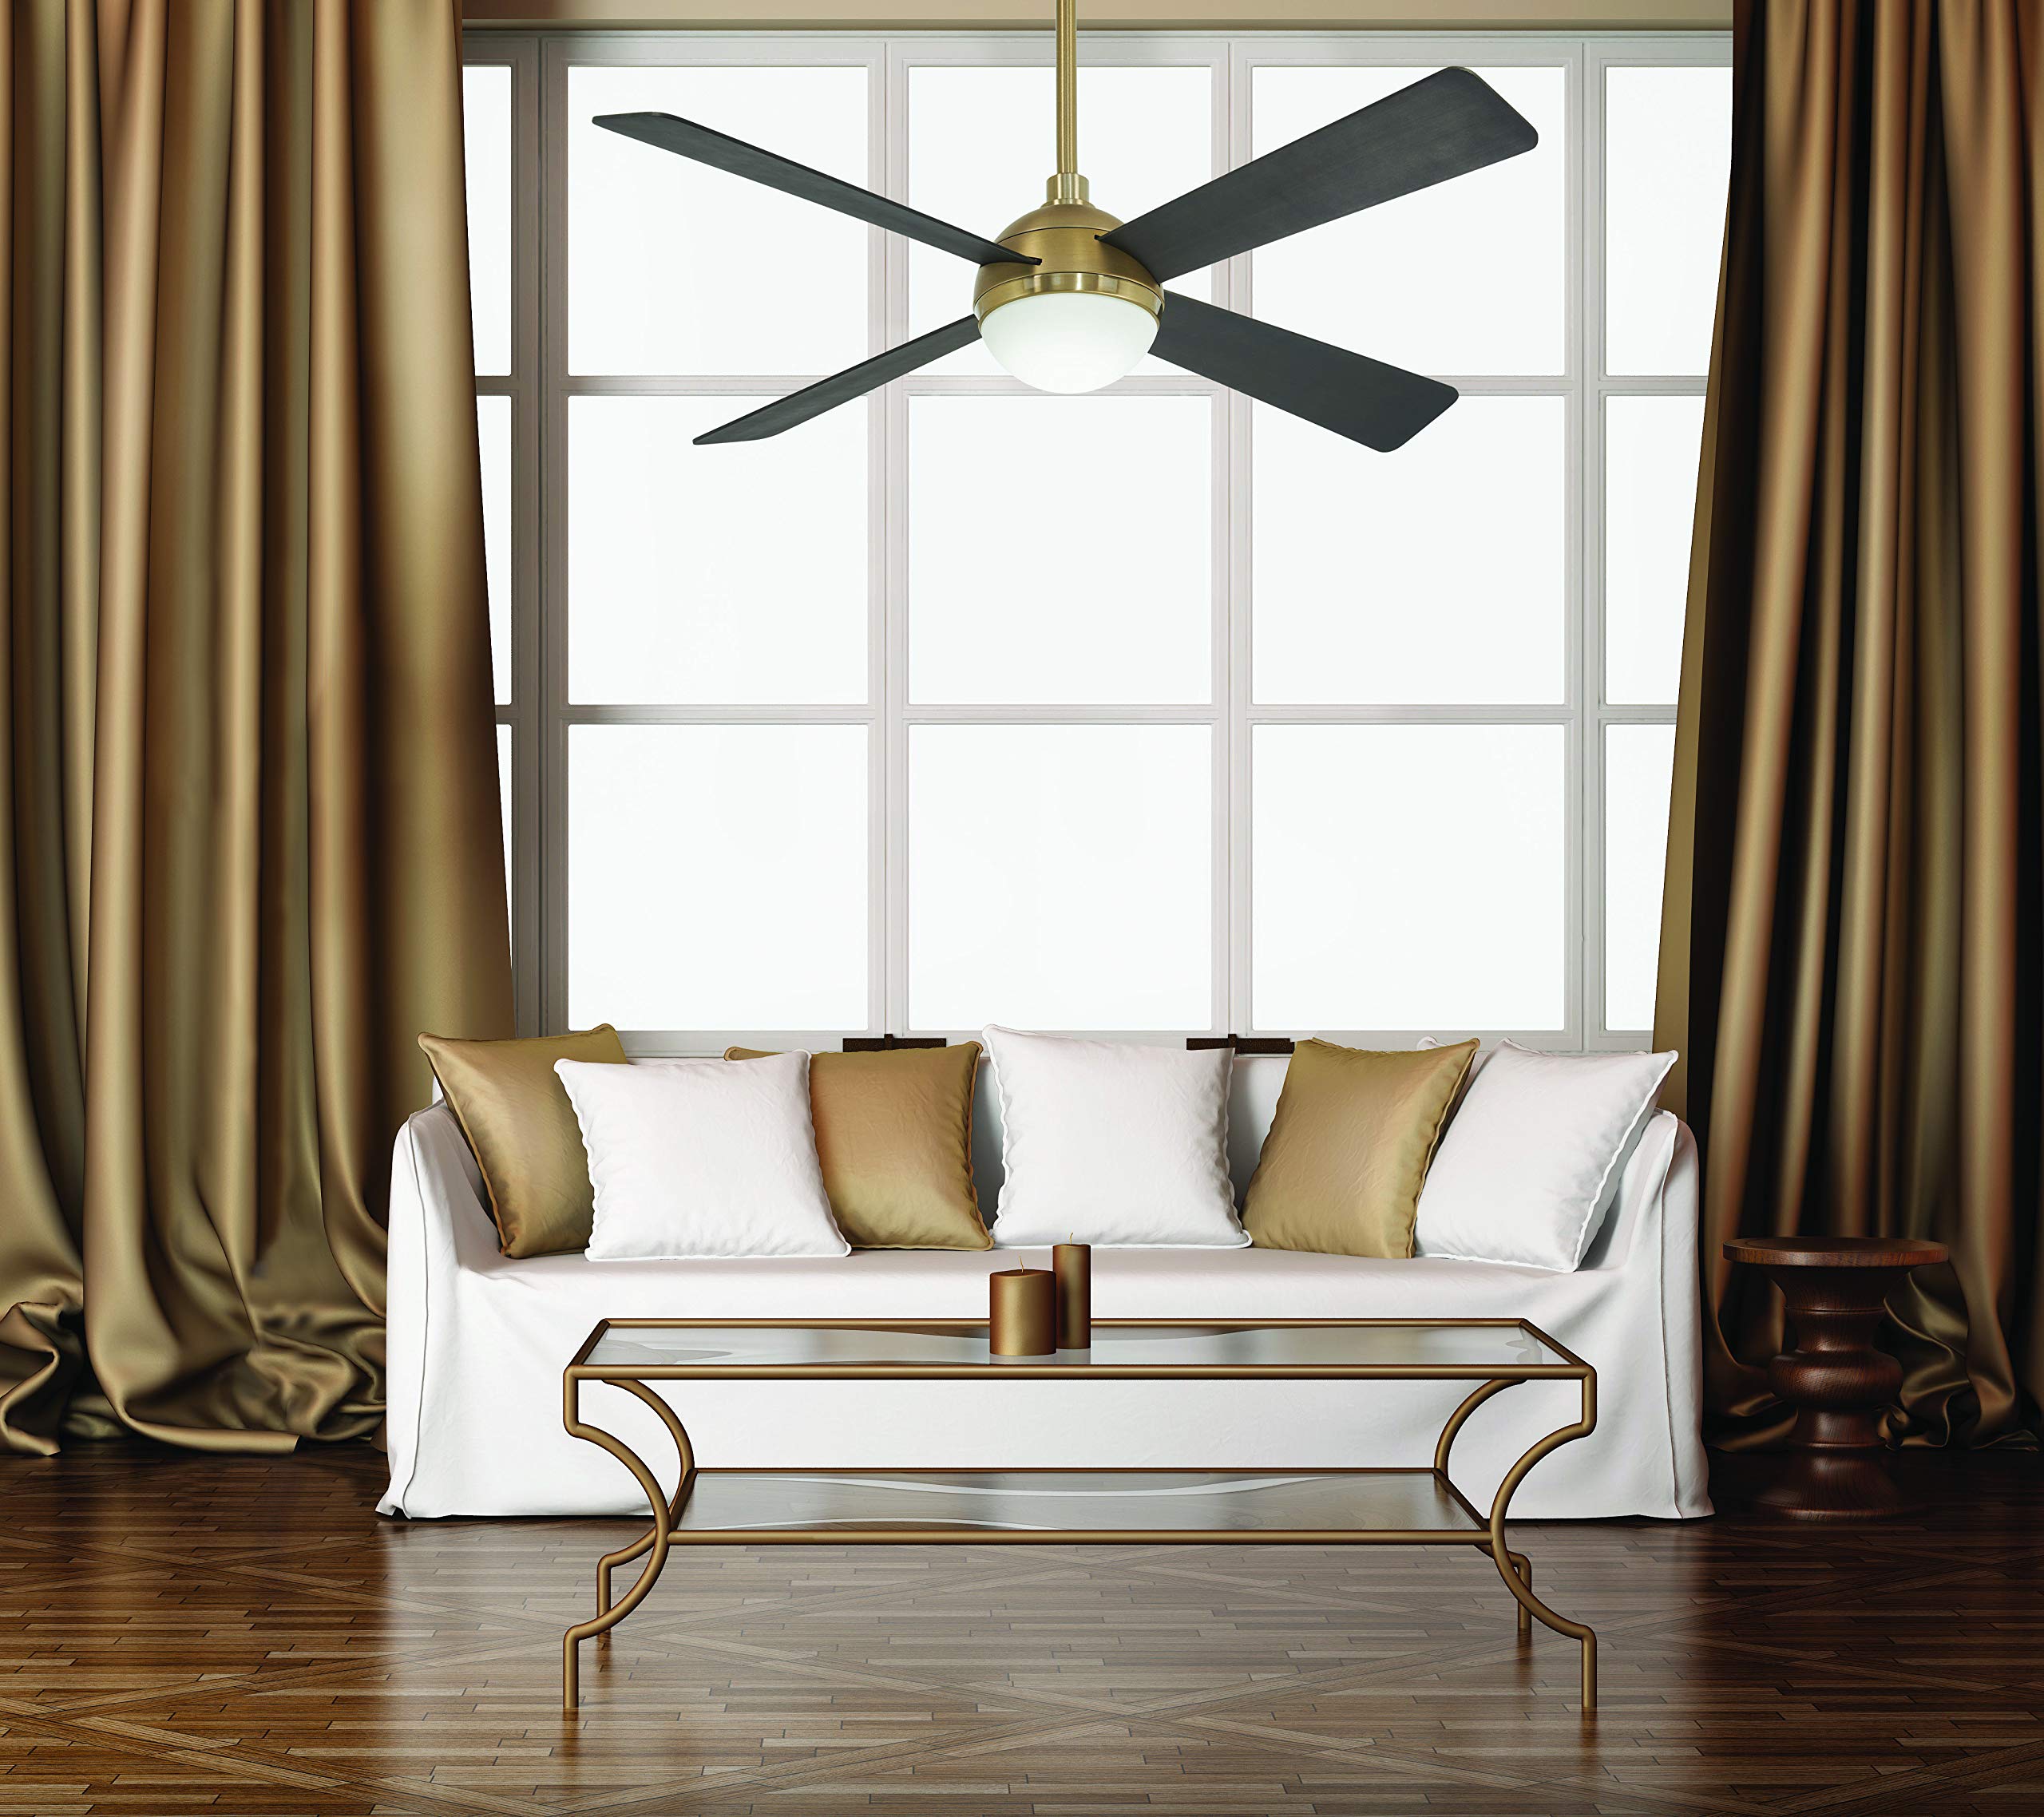 MINKA-AIRE F623L-BBR/SBR Orb 54 Inch Ceiling Fan with Integrated 16W LED Light in Brushed Brass/Soft Brass Finish